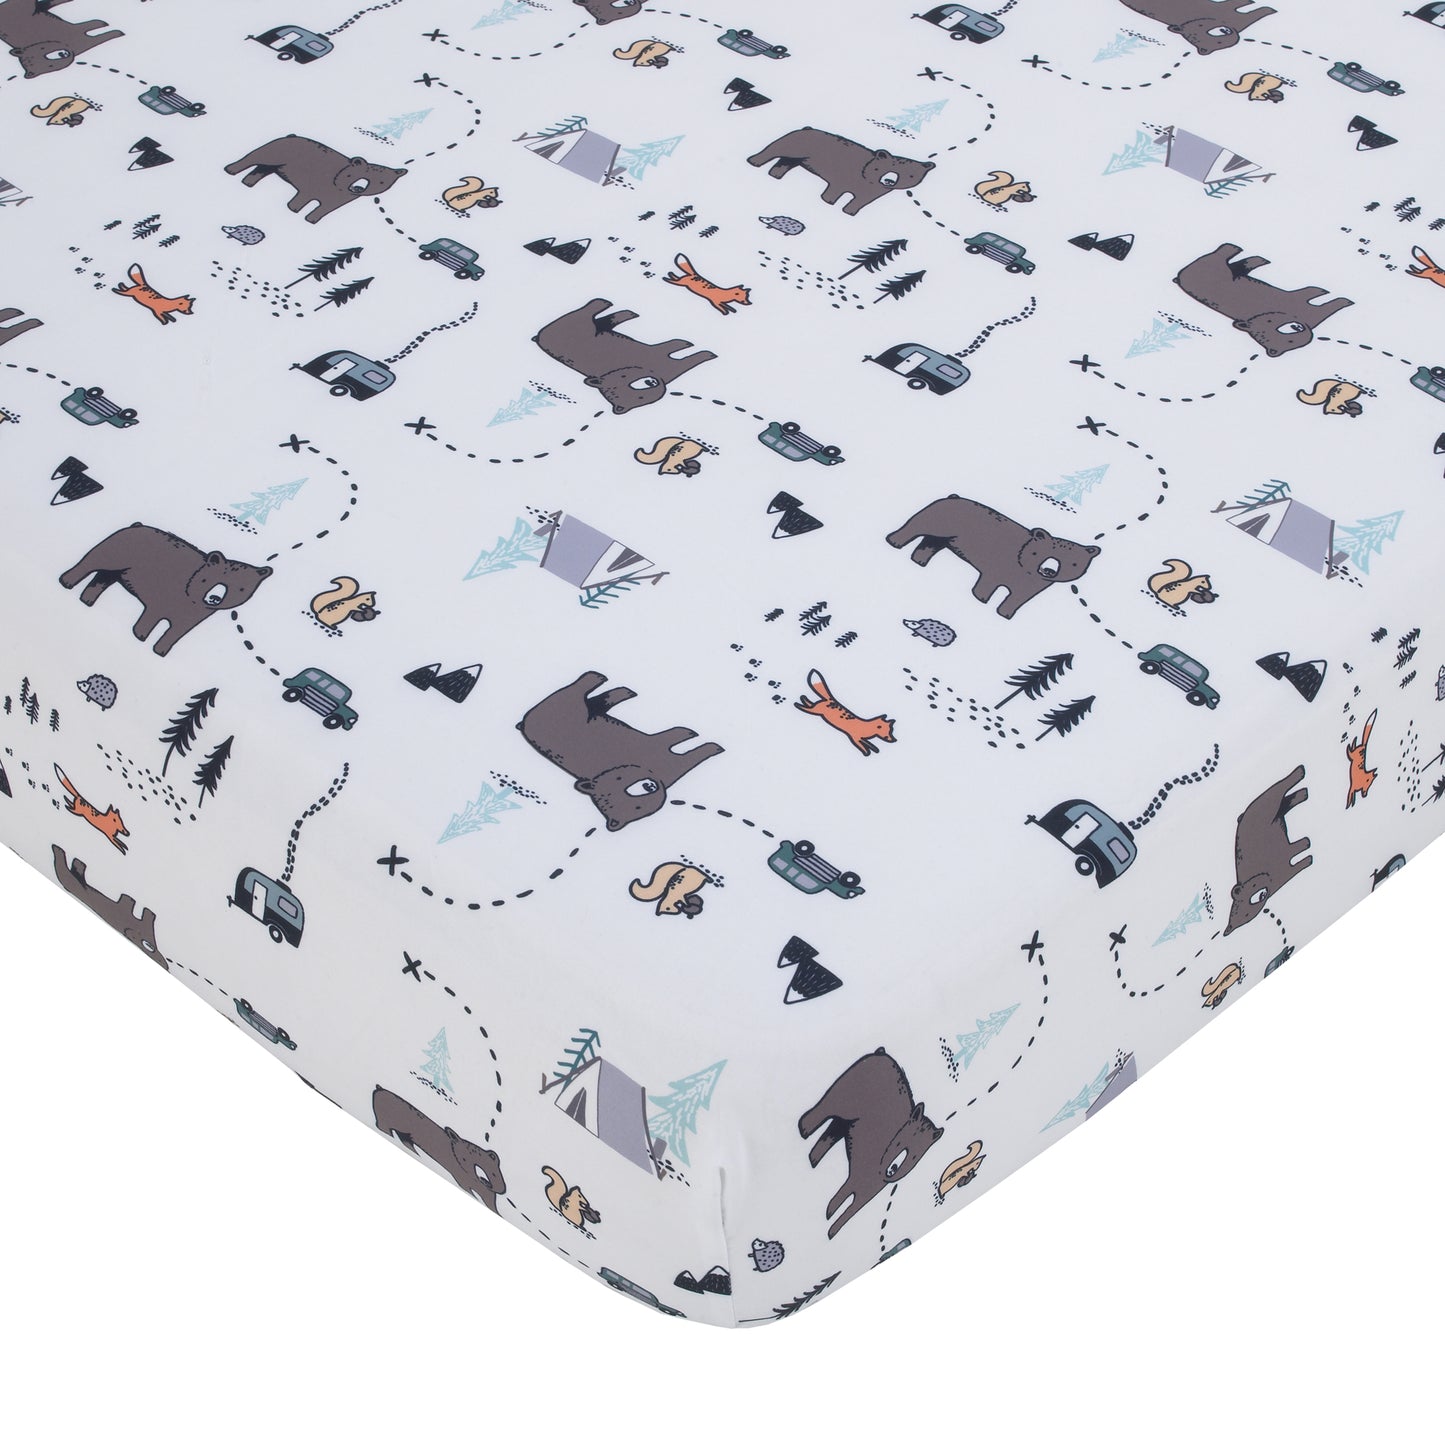 Carter's Woodland Friends White and Multi Colored Bear, Fox, Squirrel, Tree, and Camper Fitted Crib Sheet